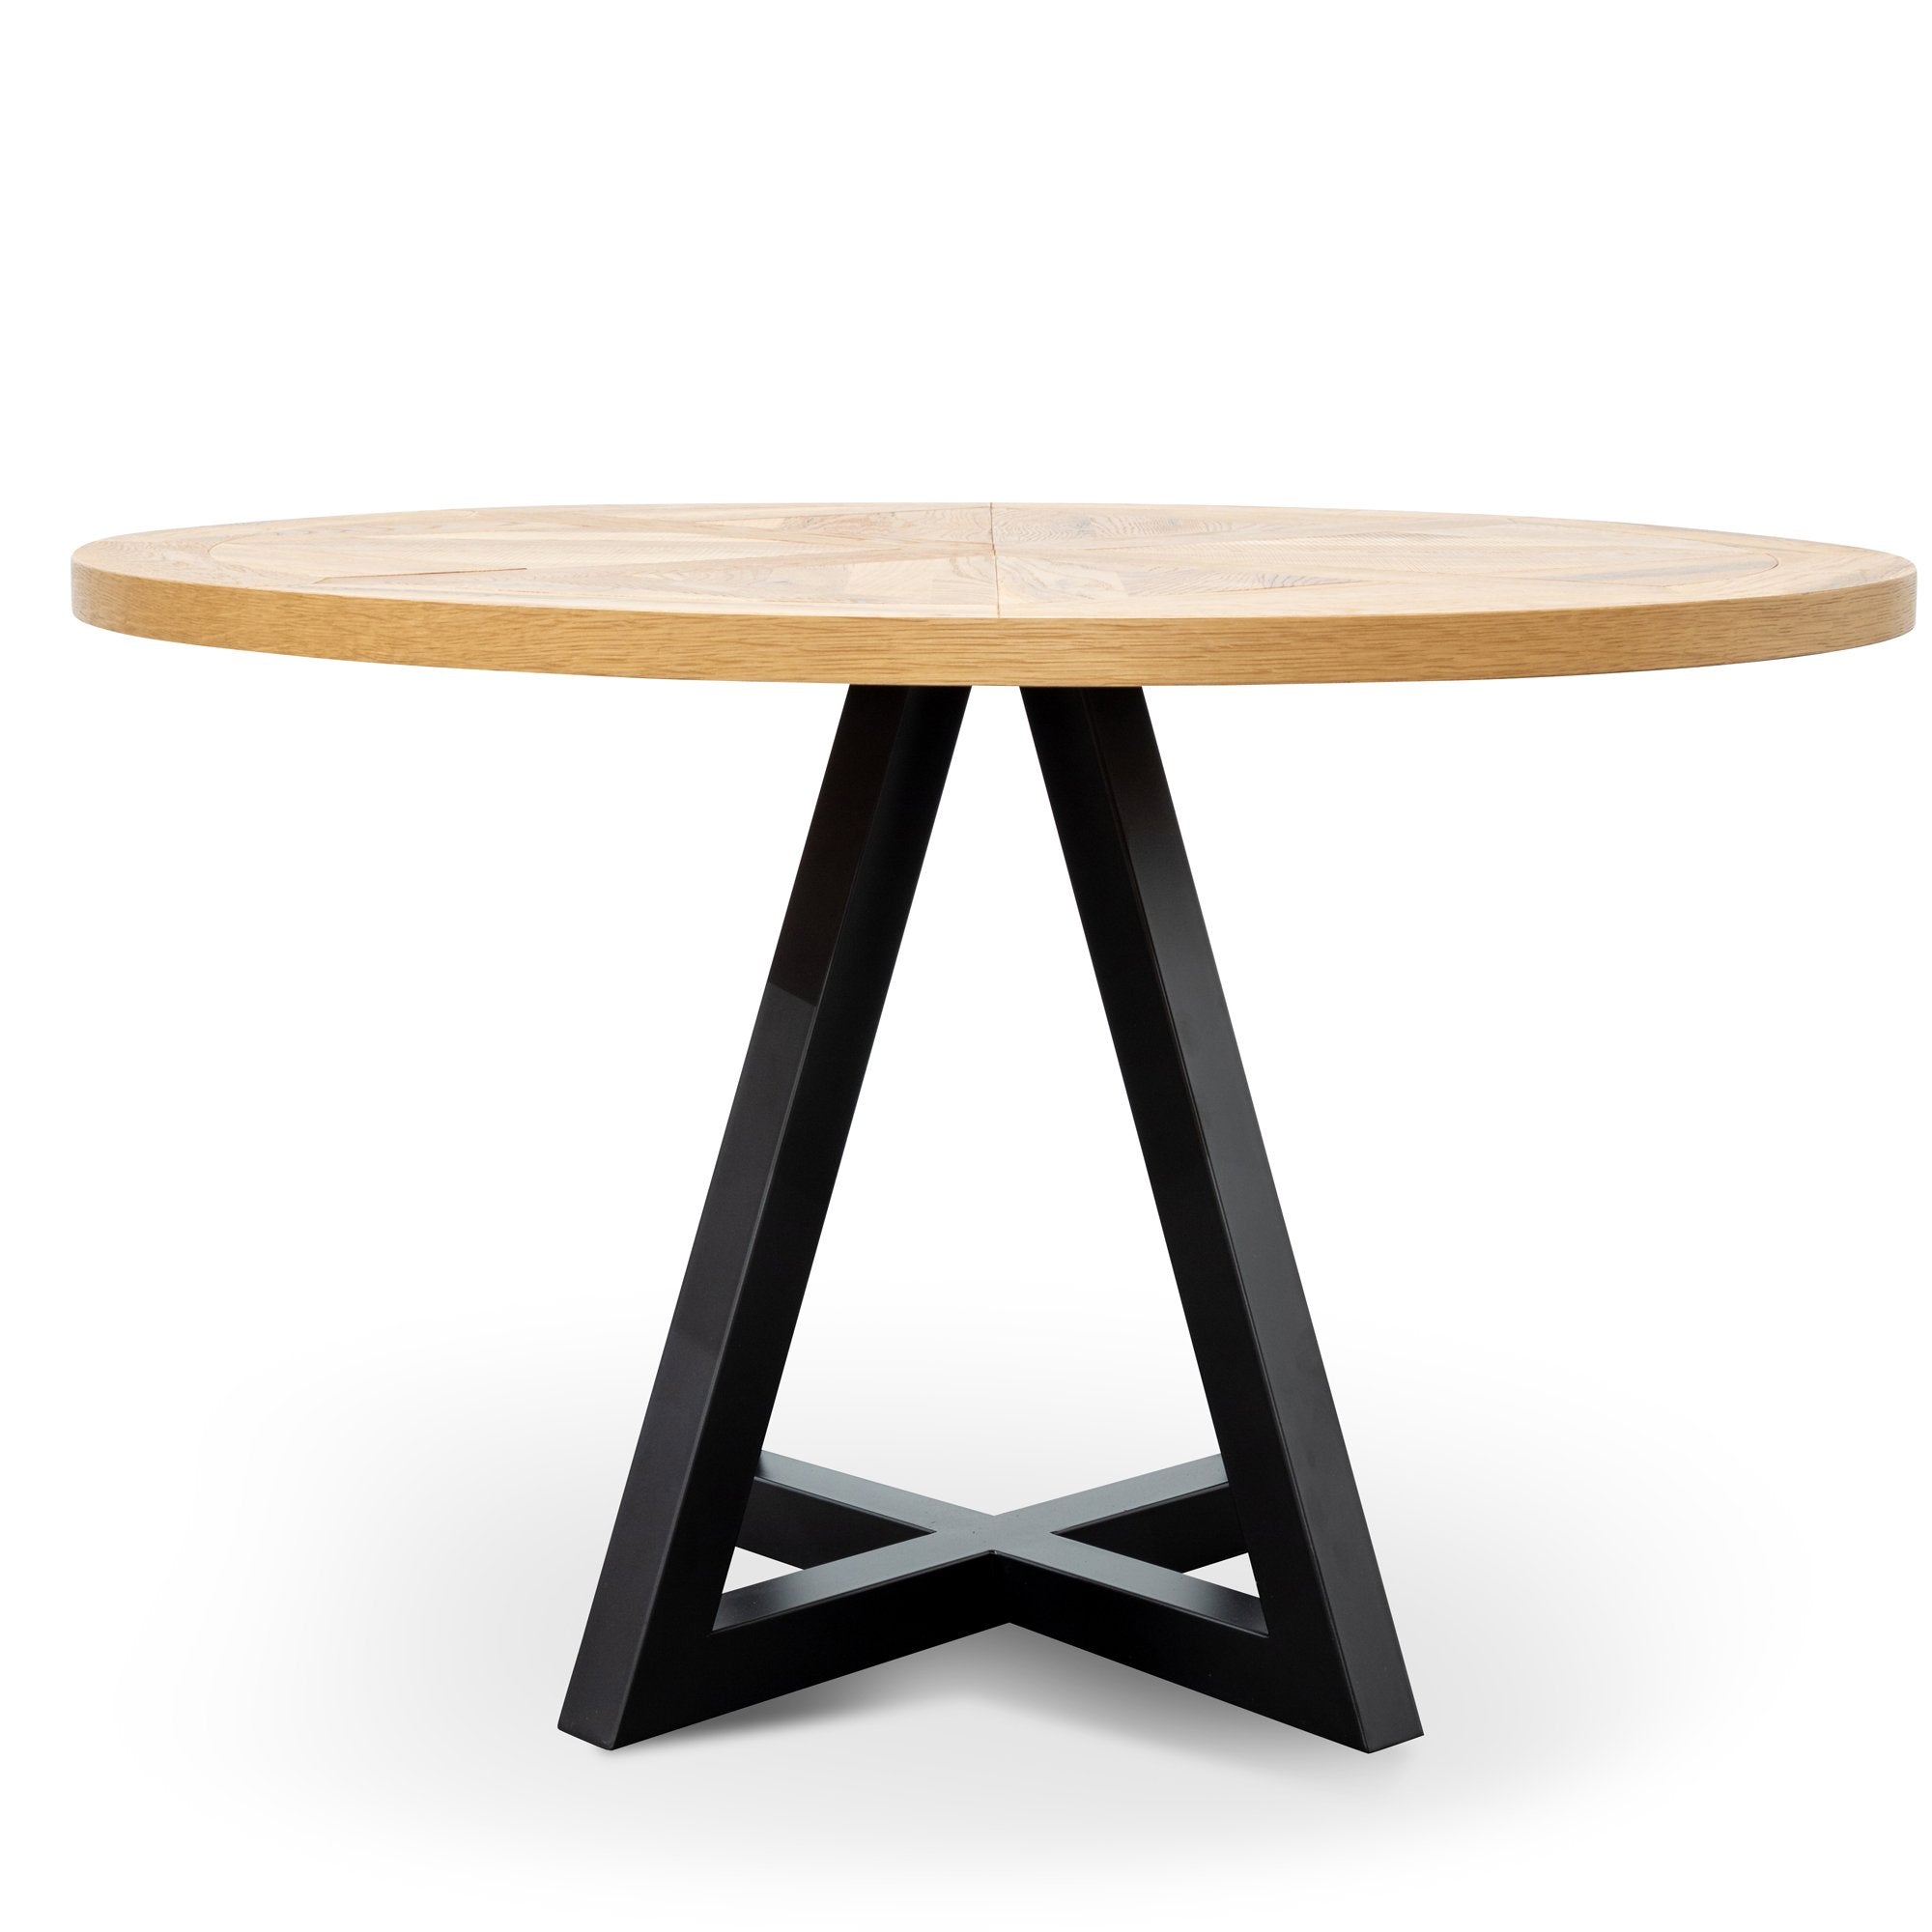 Yume 125cm Round Dining Table - European Knotty Oak and Peppercorn - Dining Tables